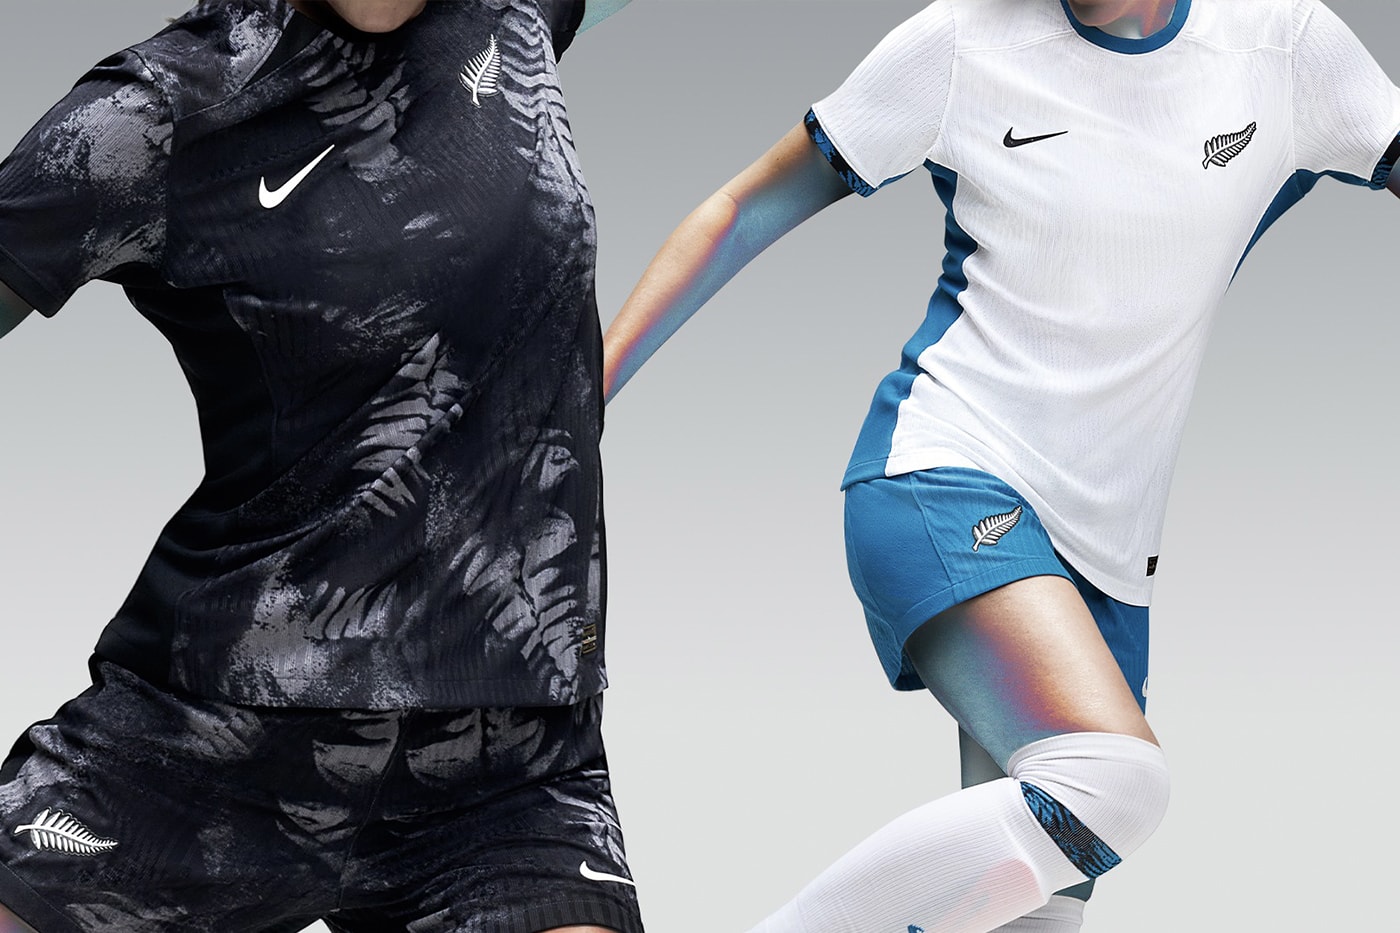 Nike Introduces 2023 Football Kits and Collections women's football national team collections brazil canada usa united kingdom britain lions lionesses portugal women soccer team netherlands australia china france korea new zeland nigeria norway 